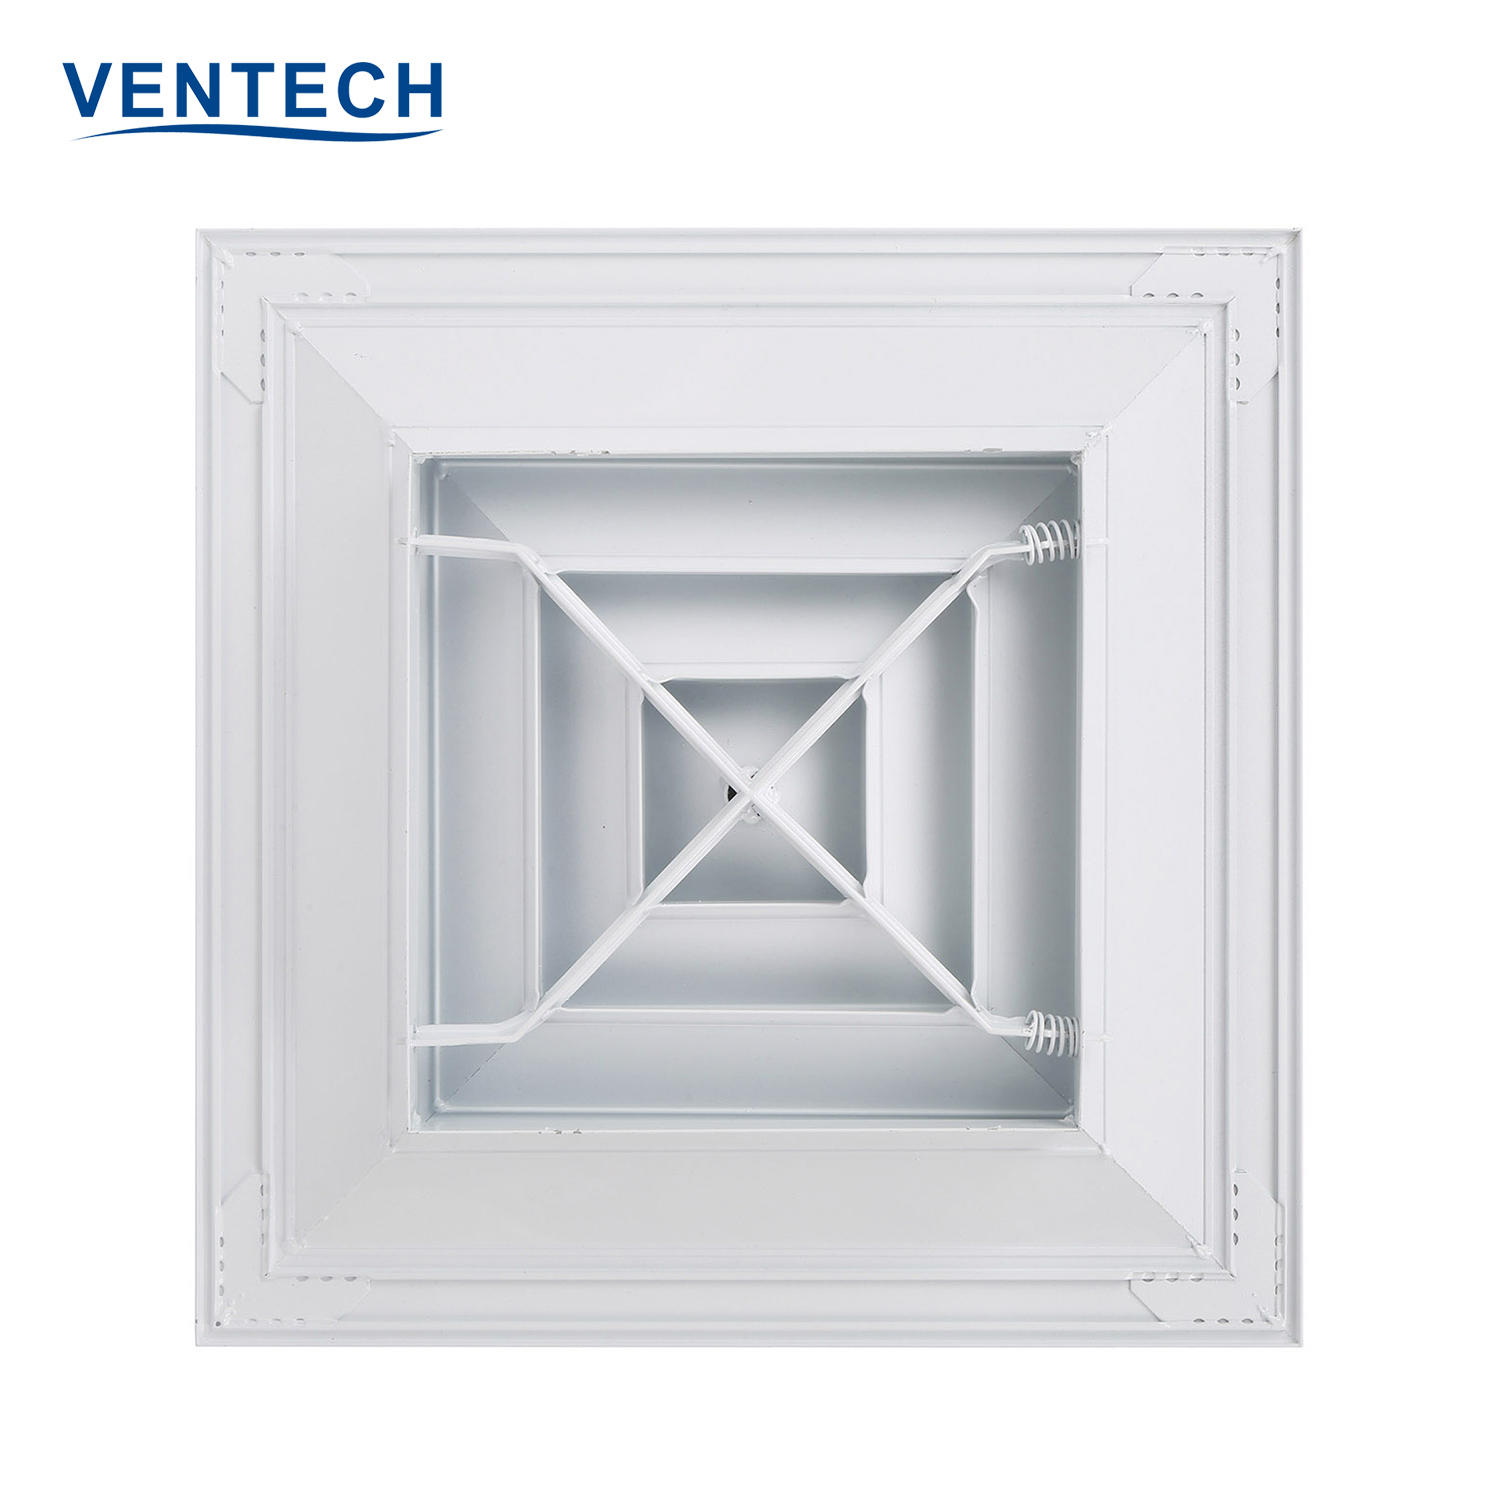 Hvac System Air Duct Outlet Exhaust Conditioning Aluminum Square Ceiling Diffuser